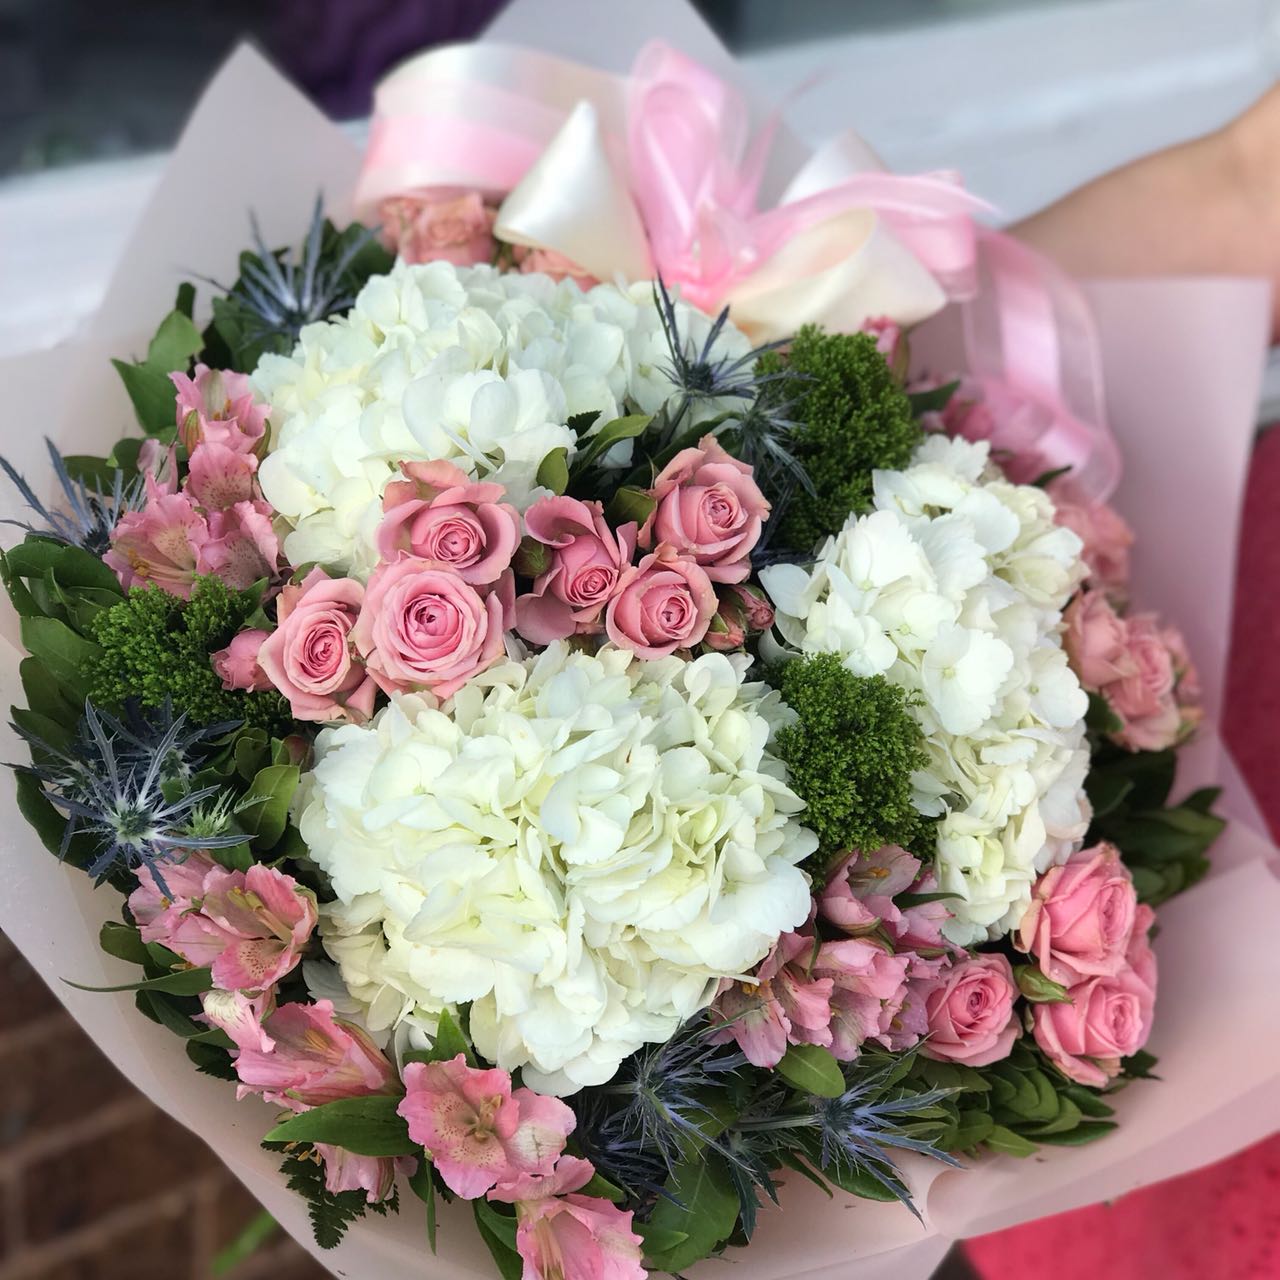 Would you walk a mile for one of her smiles? You can bet she'll be walking toward you, arms outstretched, when she receives this gorgeous. And wait till you see the smile she gives you.  Includes:  White hydrangea, pink mini roses, pink alstroemeria, eringium, assorted greens. Free message card